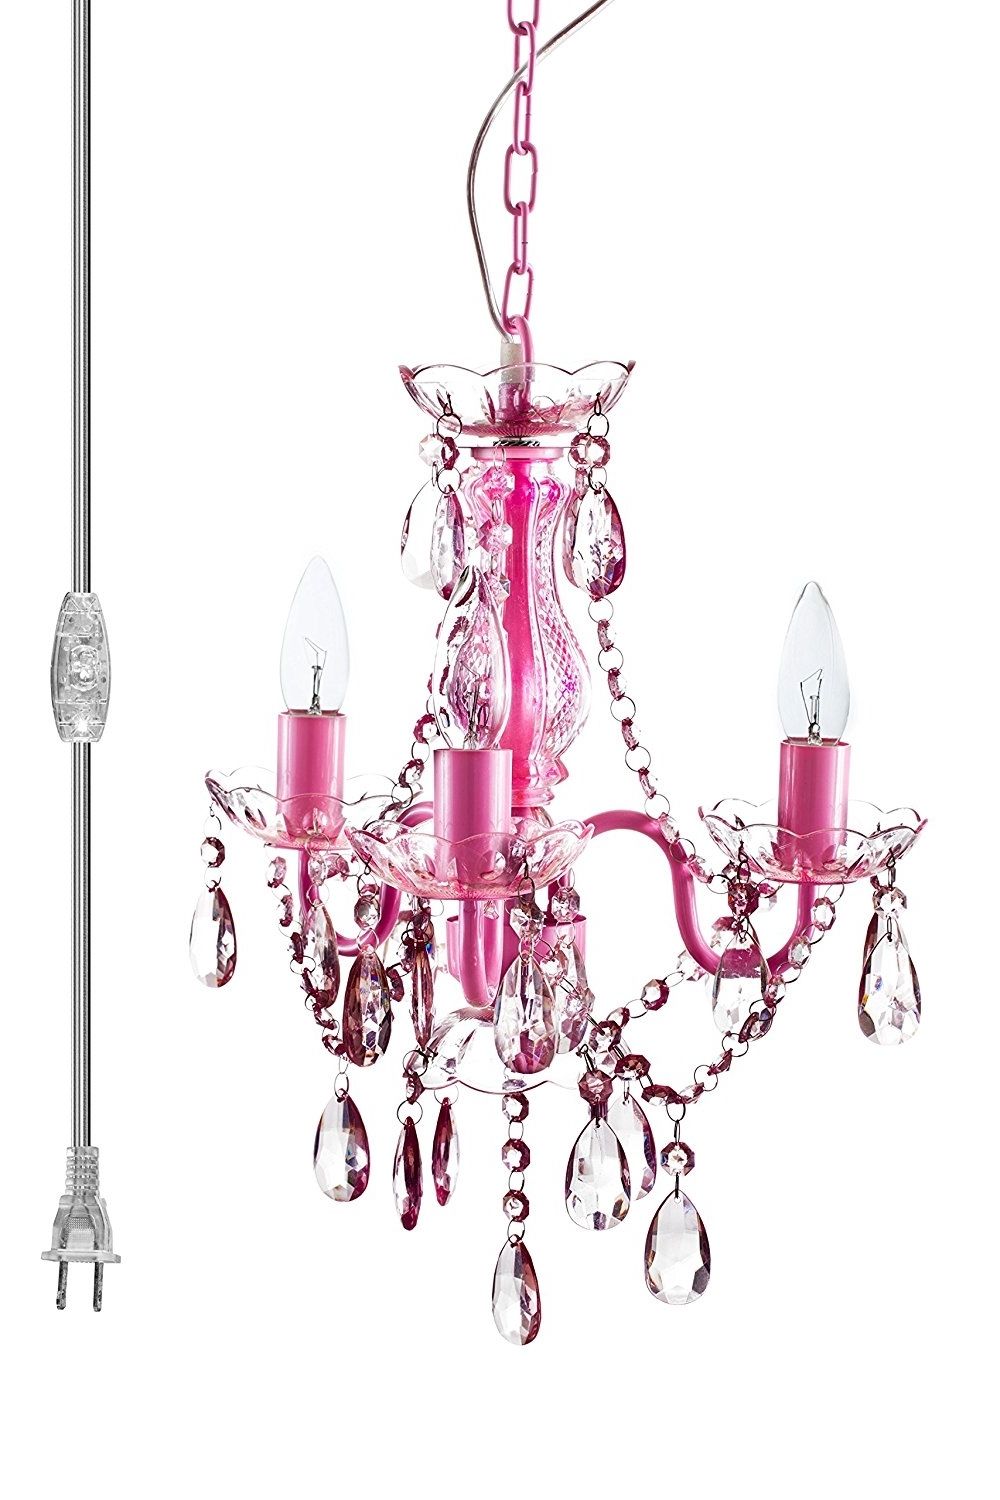 Preferred The Original Gypsy Color 3 Light Mini Plug In Pink Chandelier For Inside Small Gypsy Chandeliers (View 12 of 15)